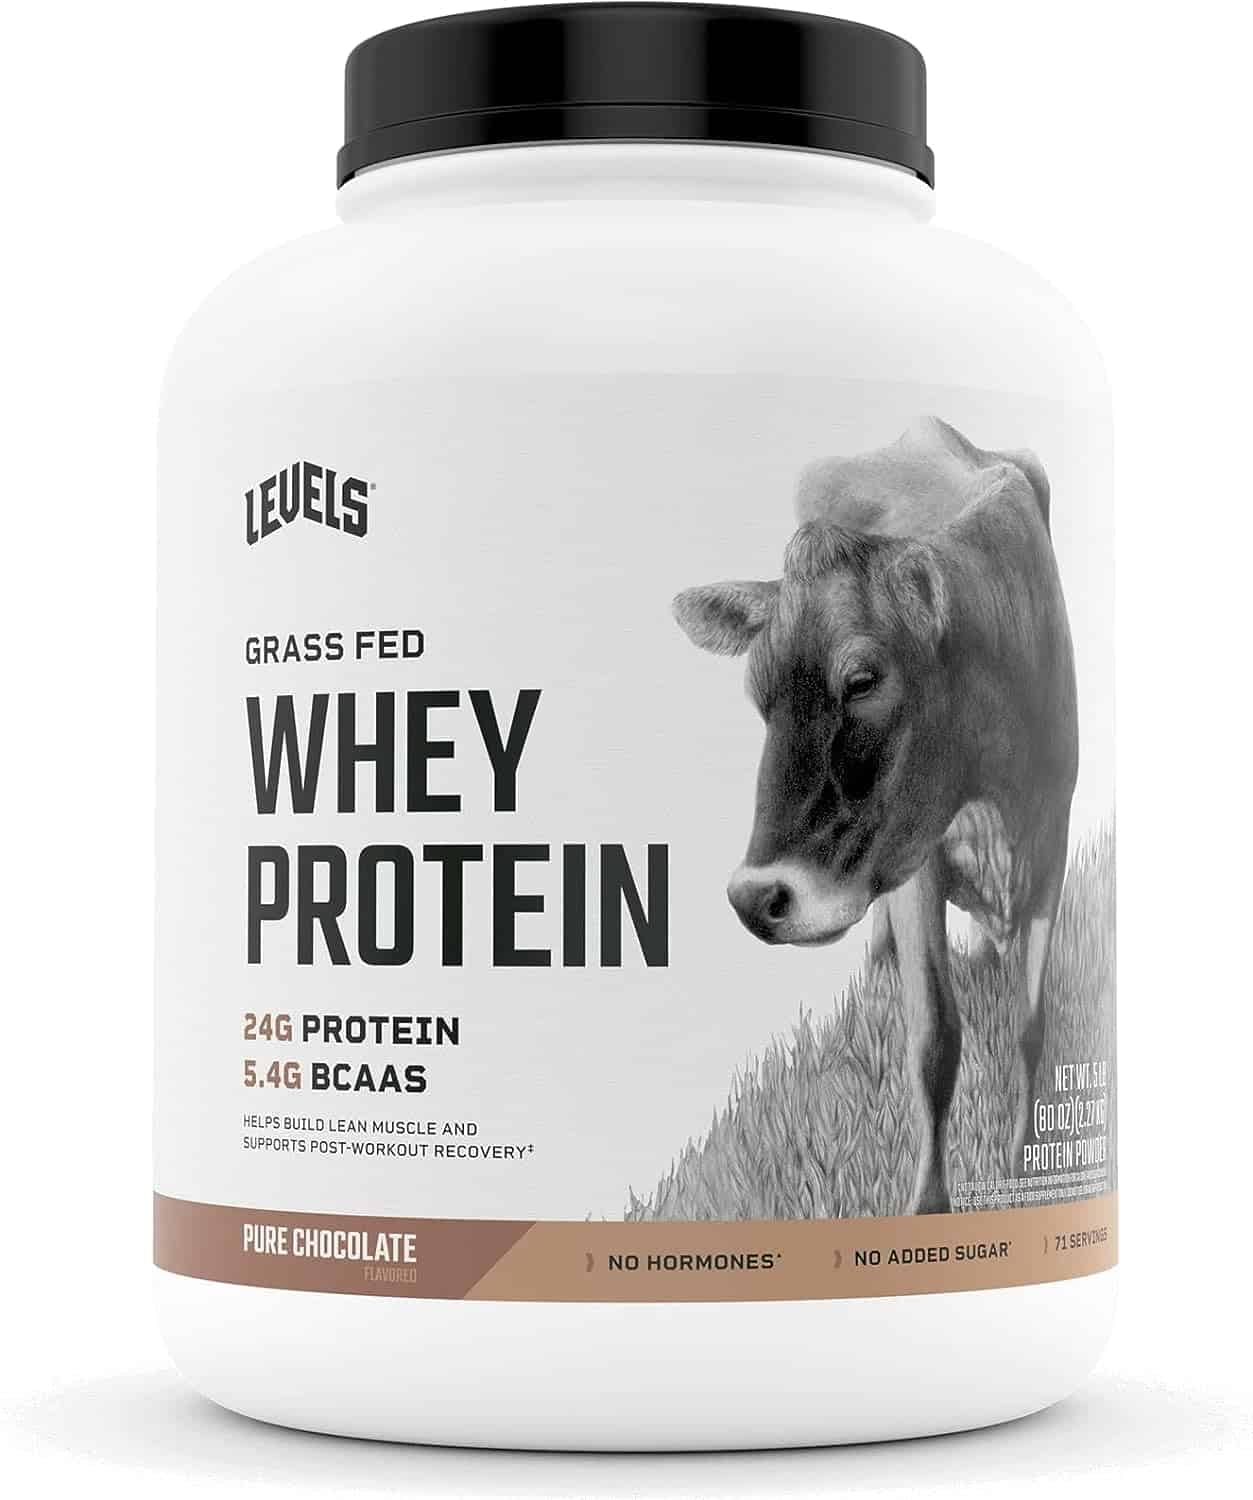 Levels Grass-Fed 100% Whey Protein